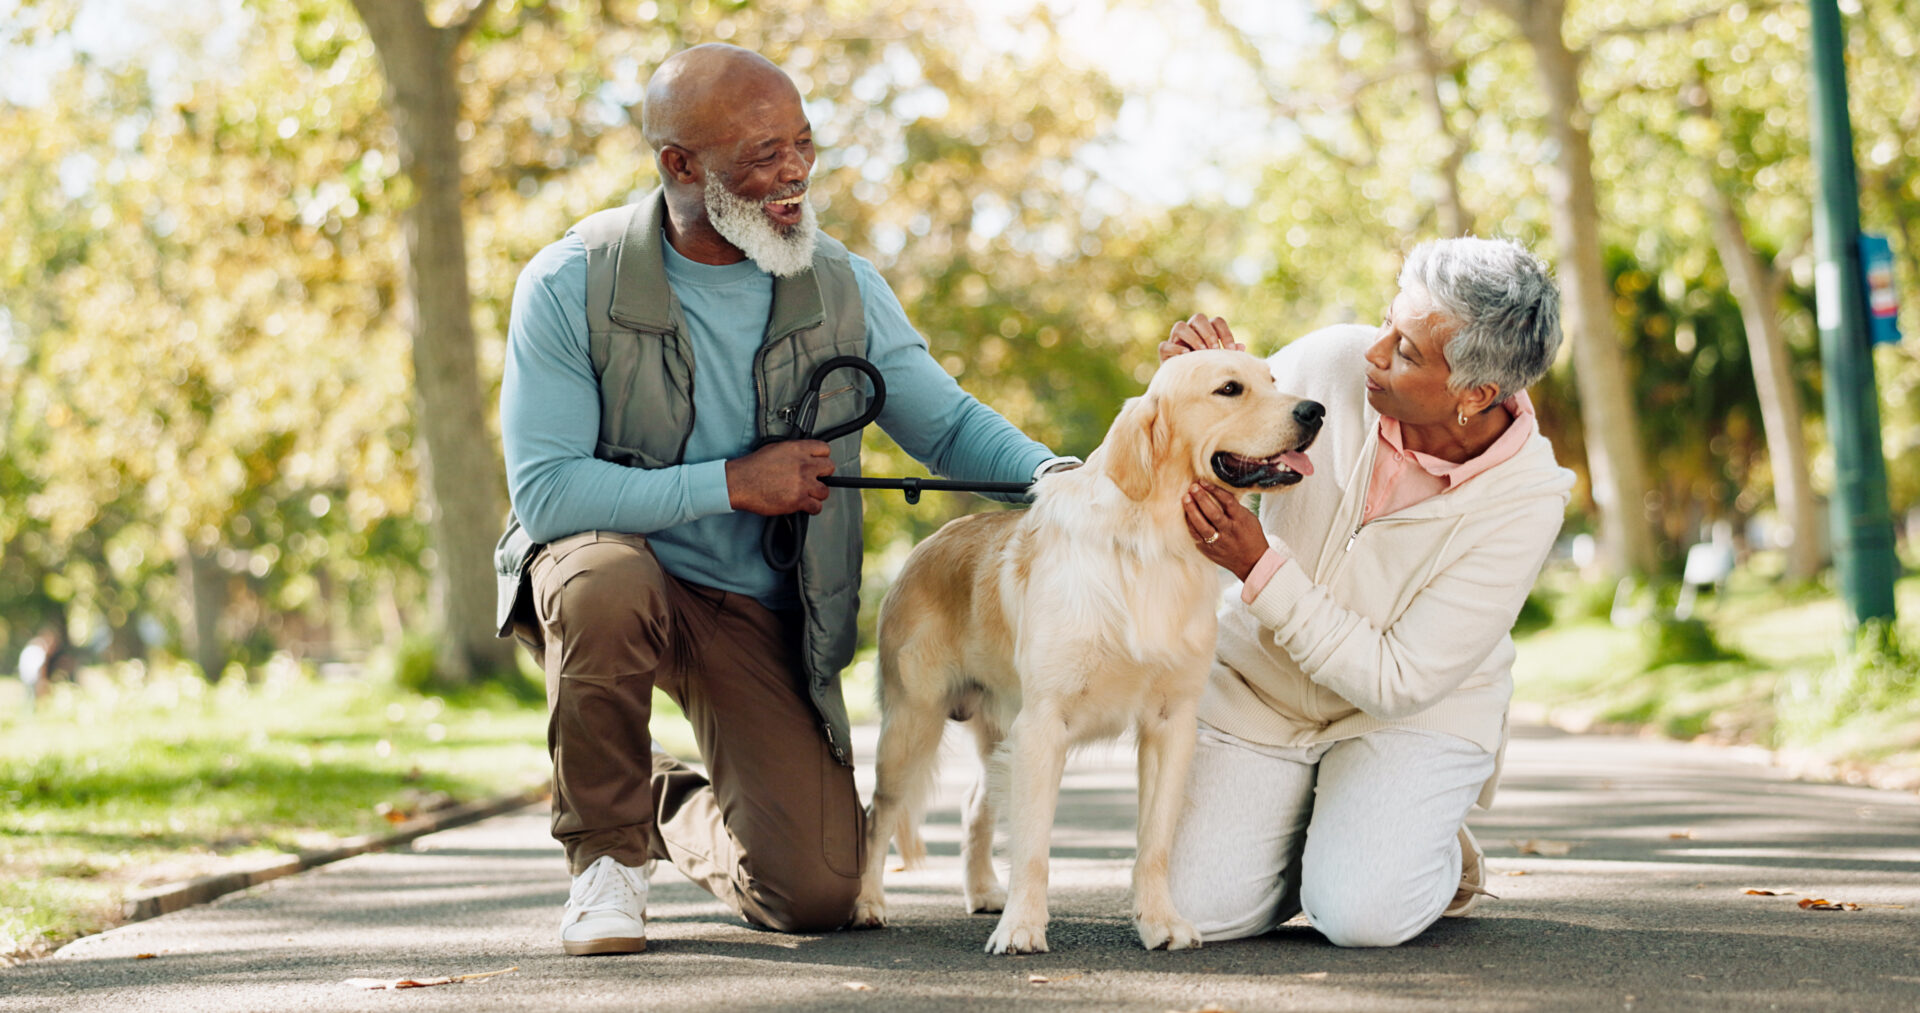 Senior husband and wife and pet Labrador dog outdoor on walk together for group exercise in park. Both elderly individuals have recovered from anterior approach to total hip replacement surgery